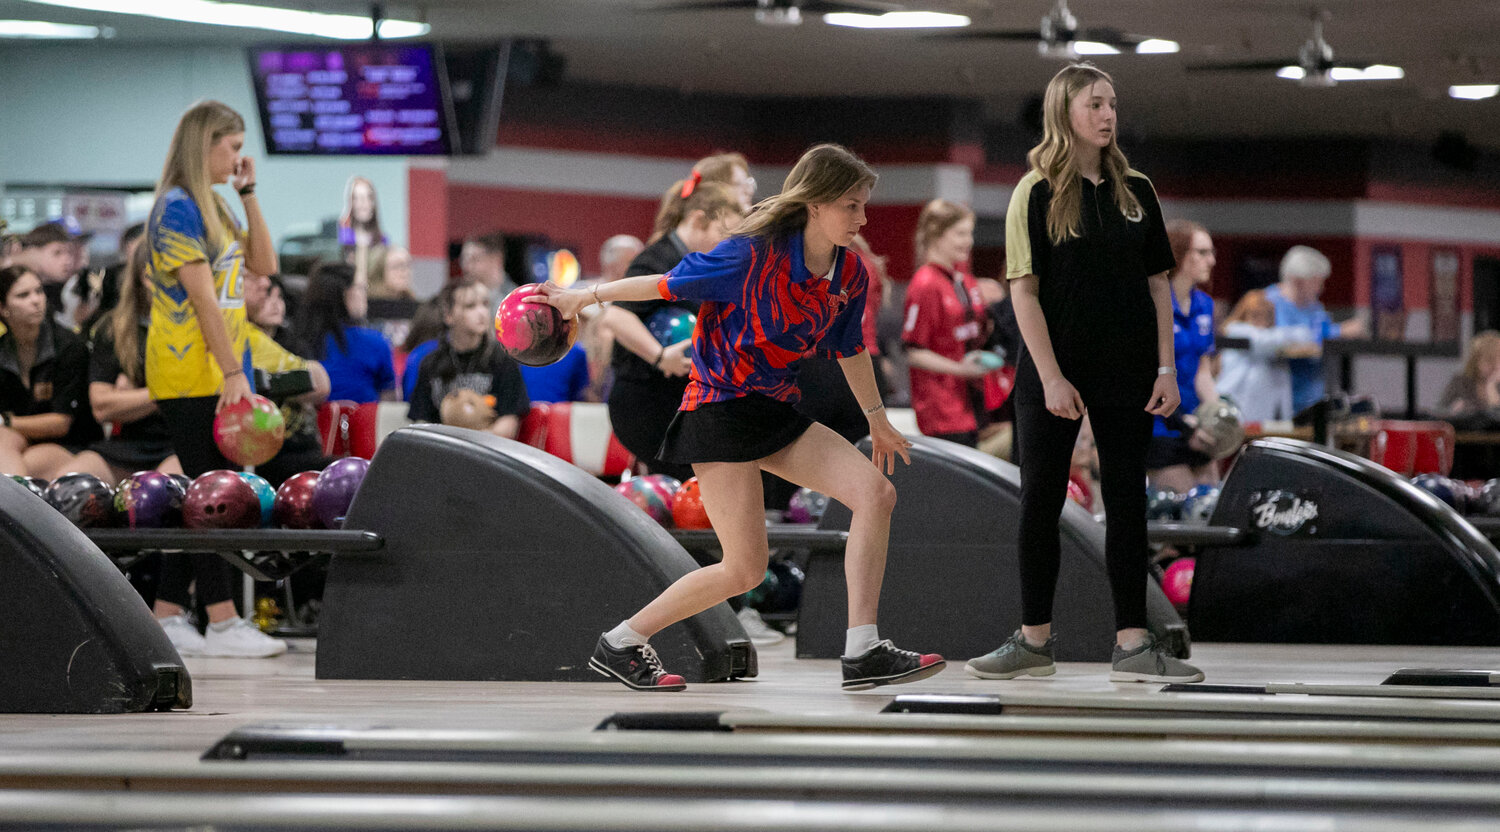 Orange Beach’s Sadie Rose loads an attempt during Thursday’s traditional rounds for seeding ahead of Friday’s AHSAA State Championship at Bowlero Mobile. Rose was the top individual bowler for the Makos with a three-game score of 454 for 18th overall.